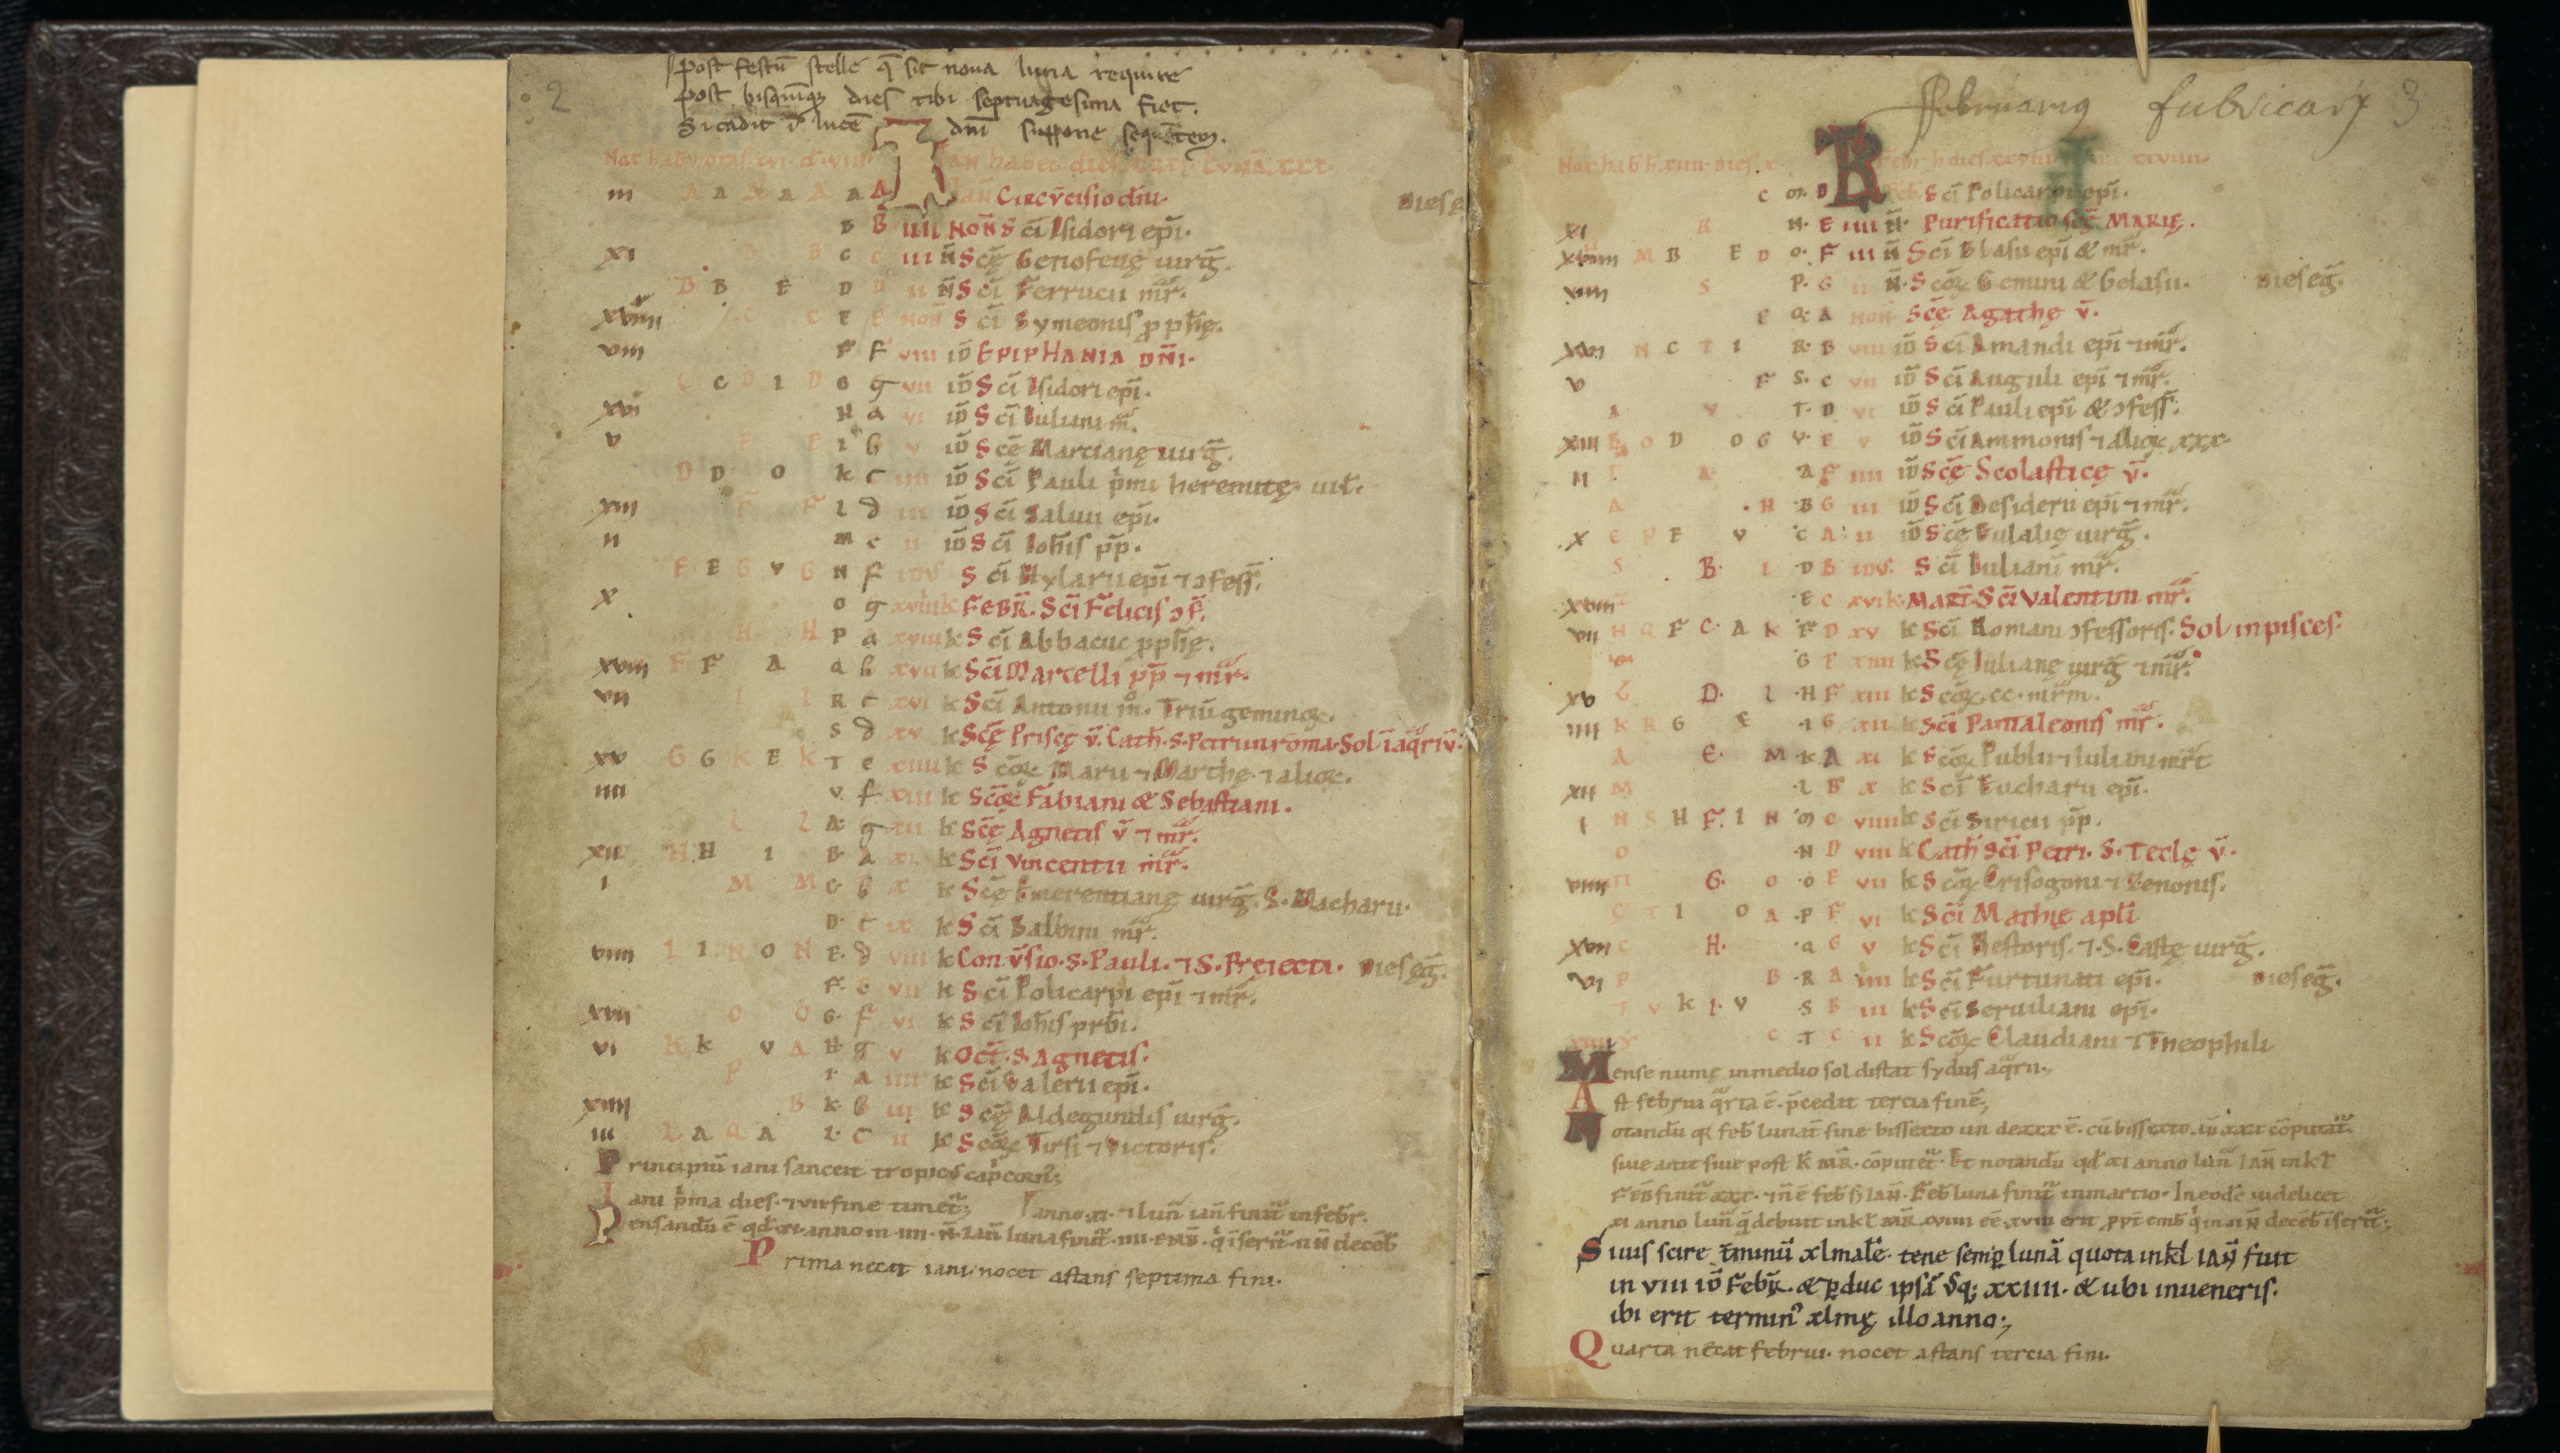 Scribe A, calendar of saints (pages 2-3)